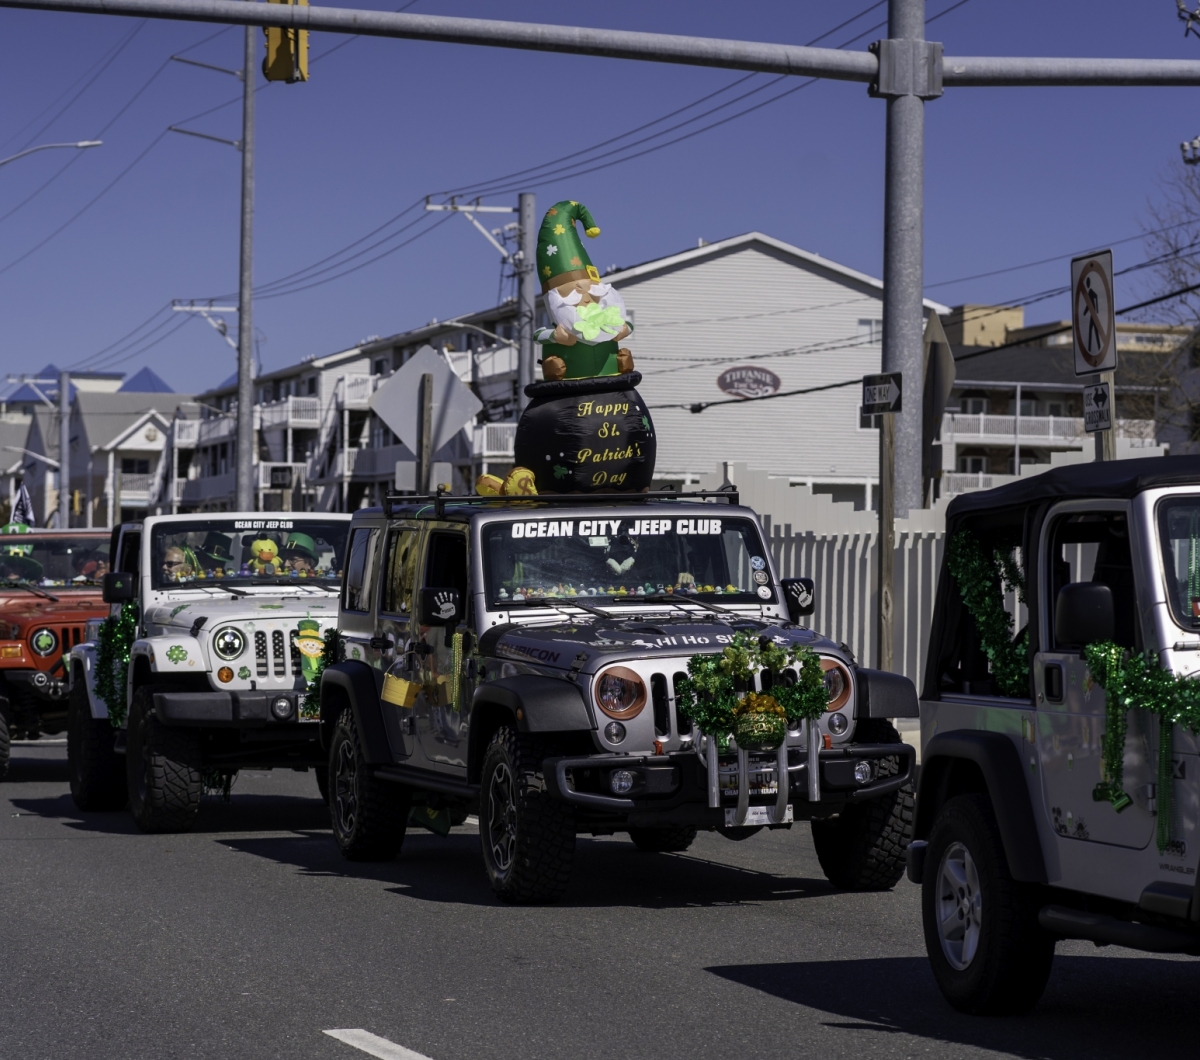 OCMD Jeep Club at the St. Patrick's Day parade